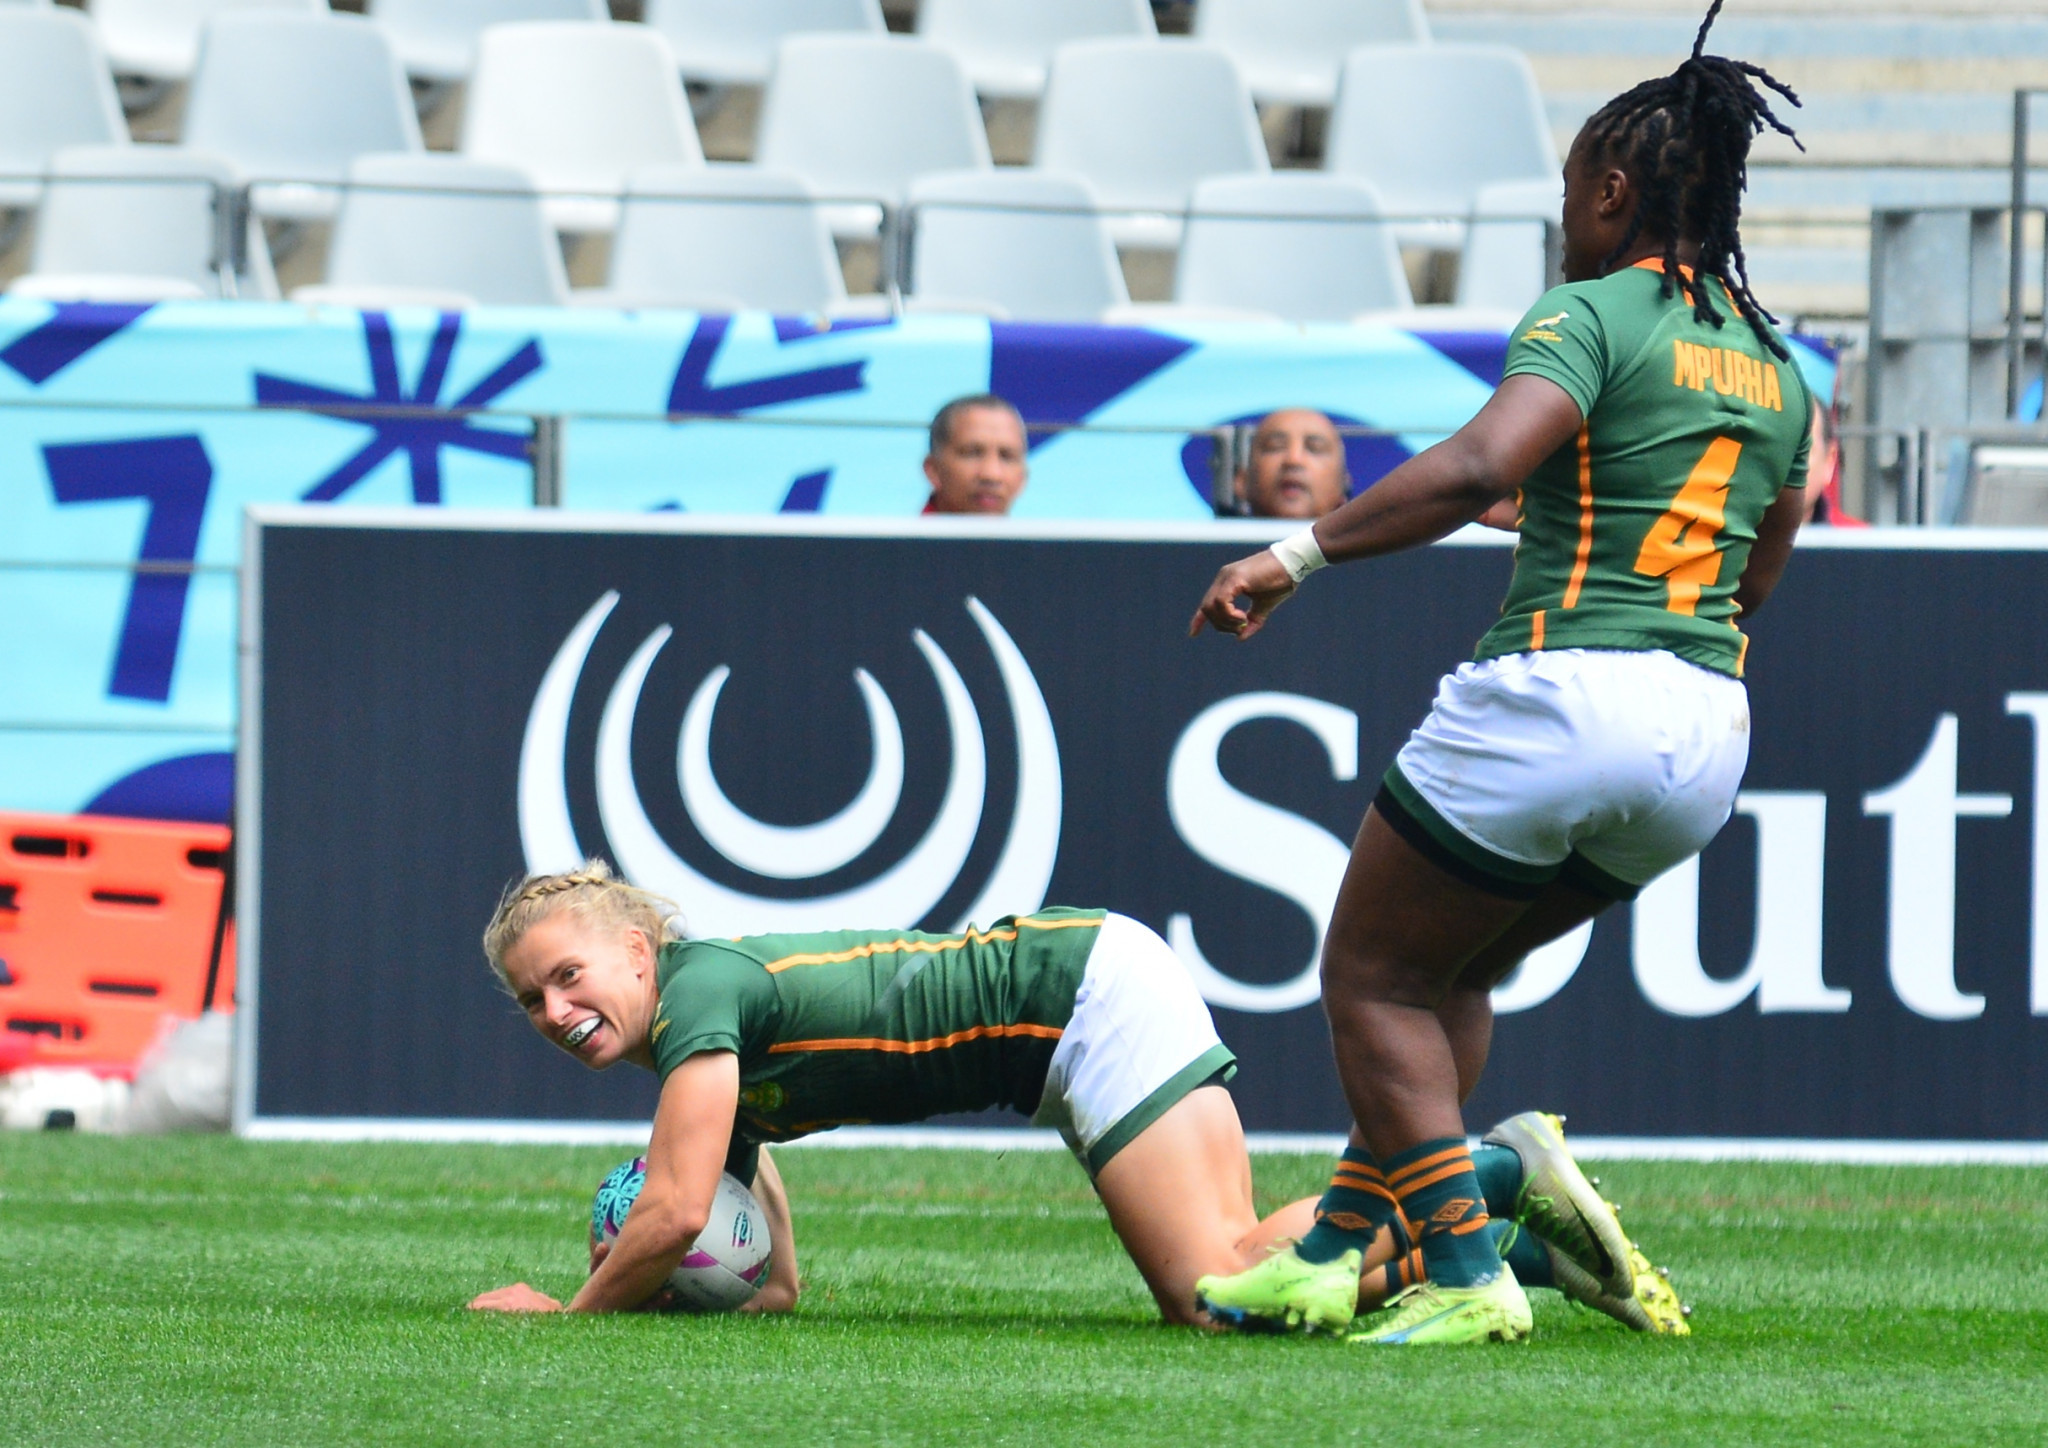 South Africa secure women’s rugby sevens place at Paris 2024